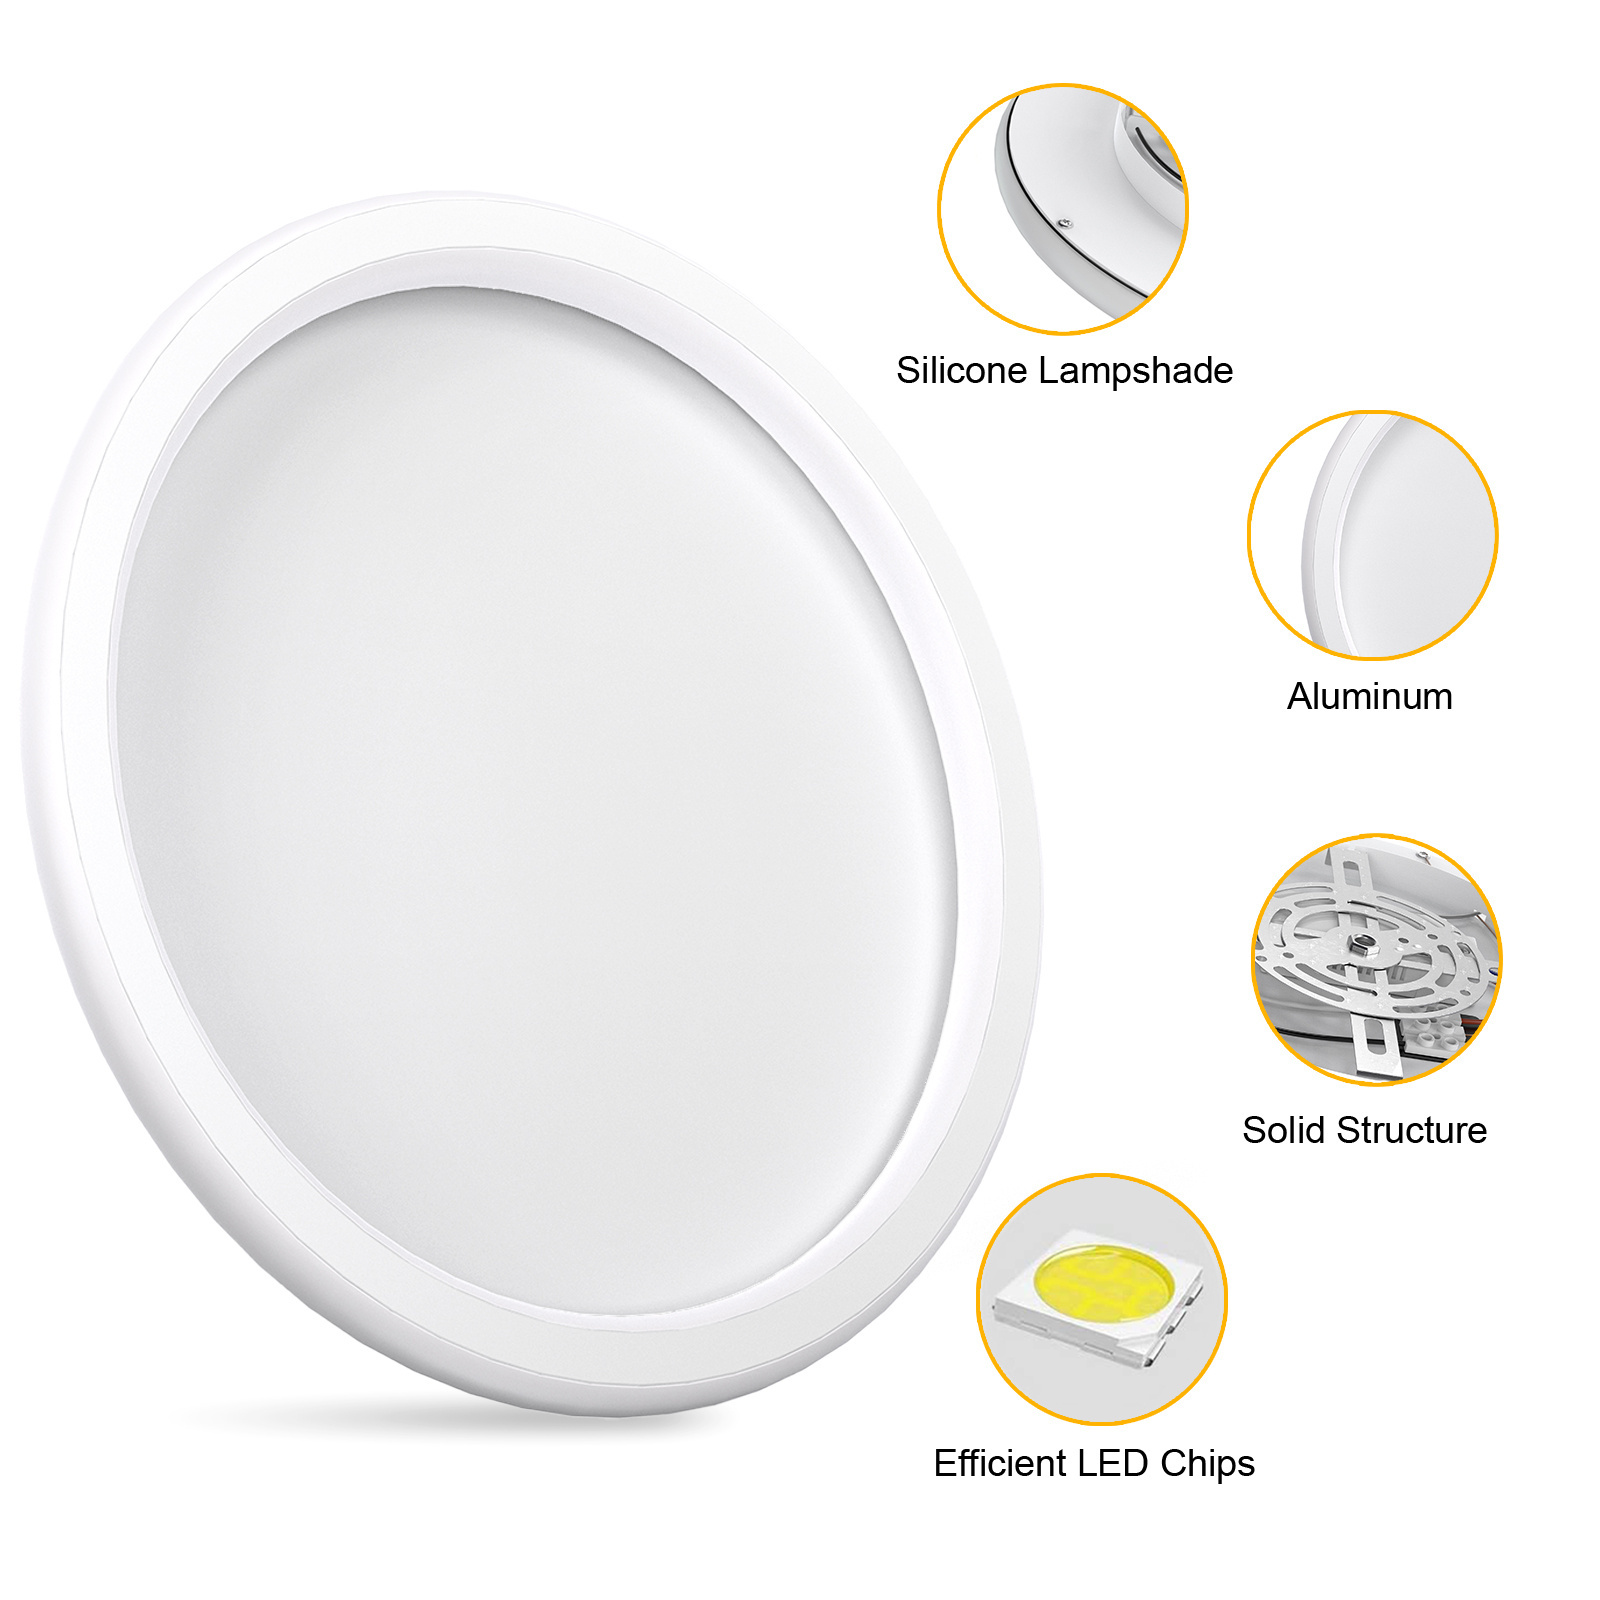 Flush Mount LED Ceiling Light,Cheeroll 12 Inch Ceiling Lighting Fixture 45W 6500K Cold White Light Round Ceiling Light,for Bathroom, Kitchen, Bedroom, Living Room, Garage Non Dimmable